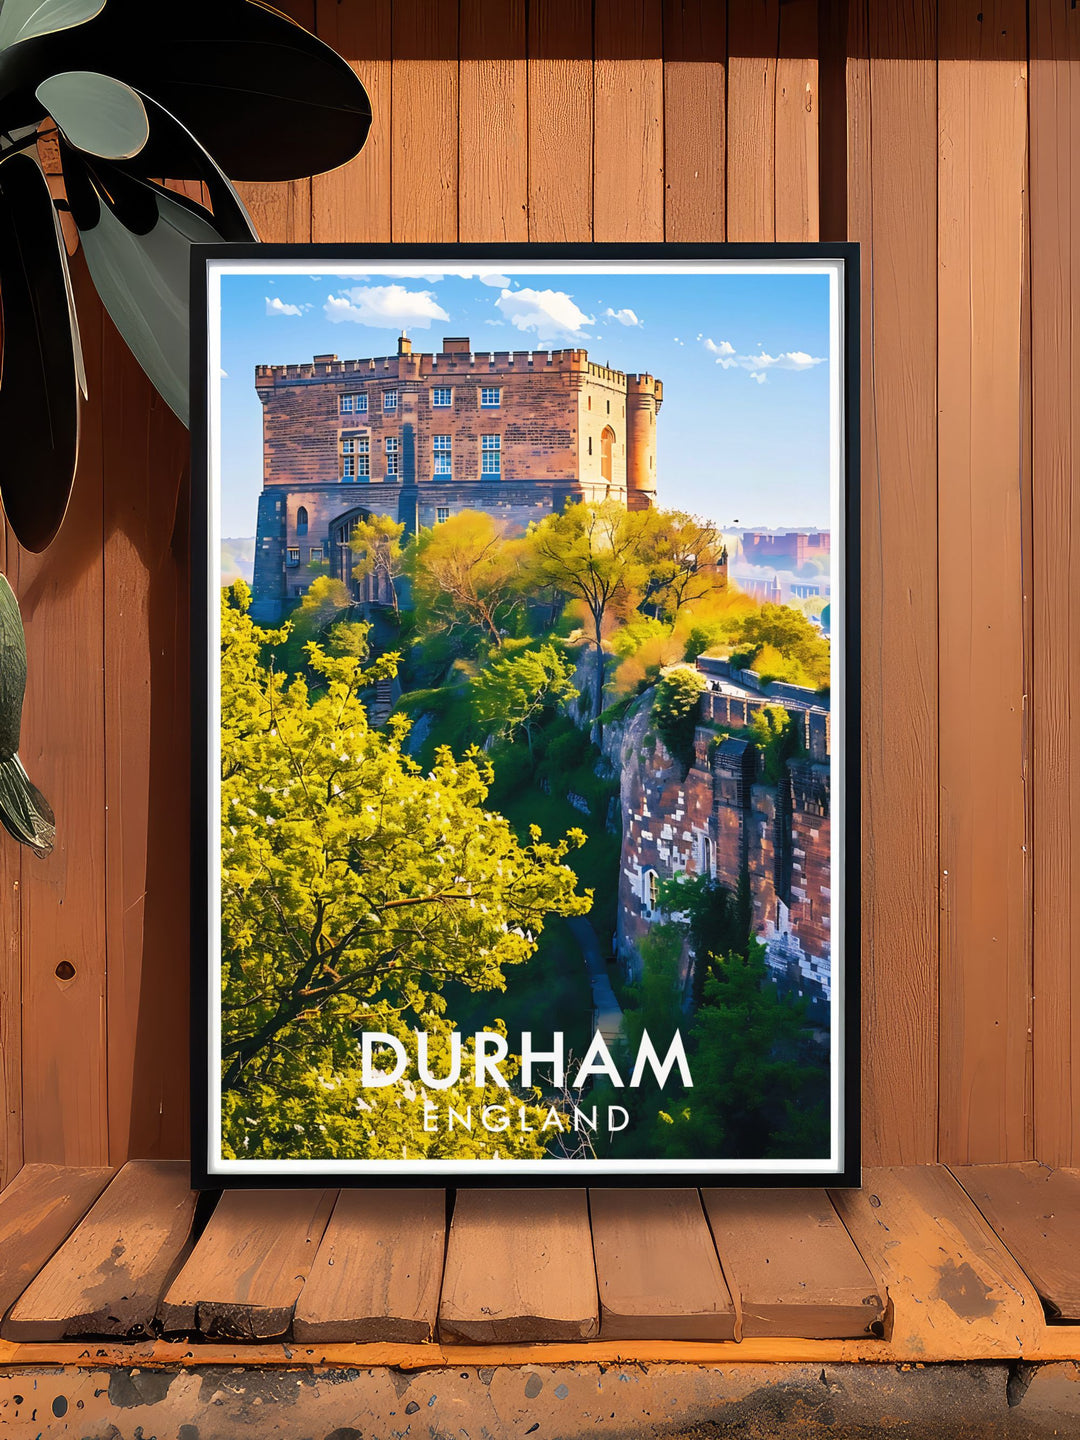 Durhams enchanting streets and historic architecture are depicted in this travel poster, offering a visual journey through one of Englands most picturesque cities.